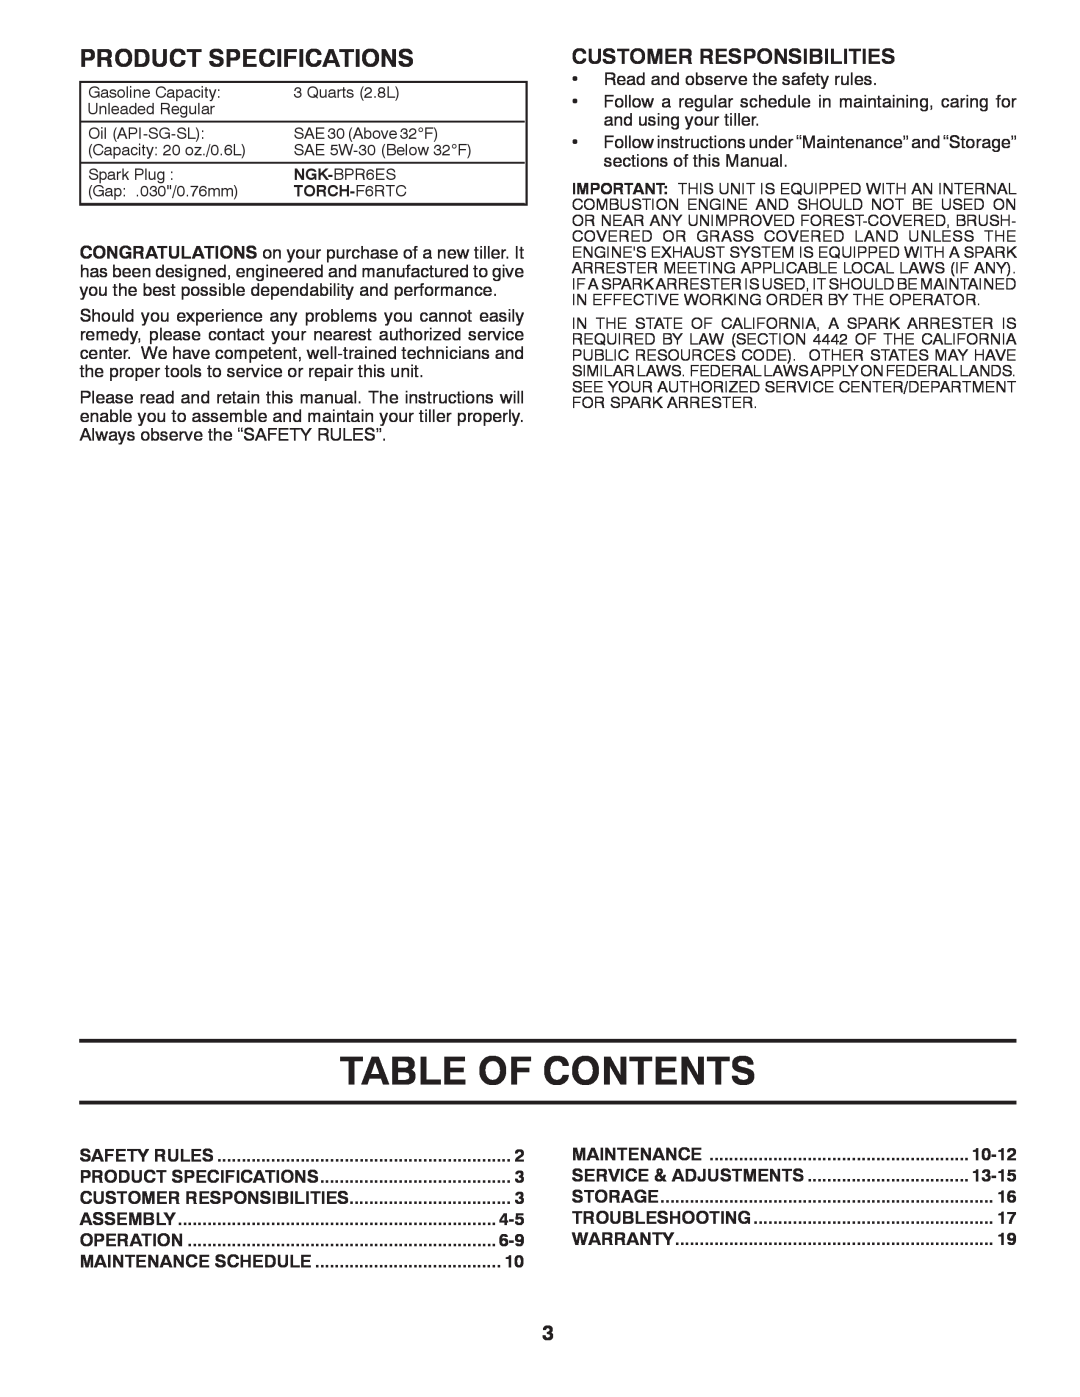 Poulan HDF900 manual Table Of Contents, Product Specifications, Customer Responsibilities, 10-12, 13-15 